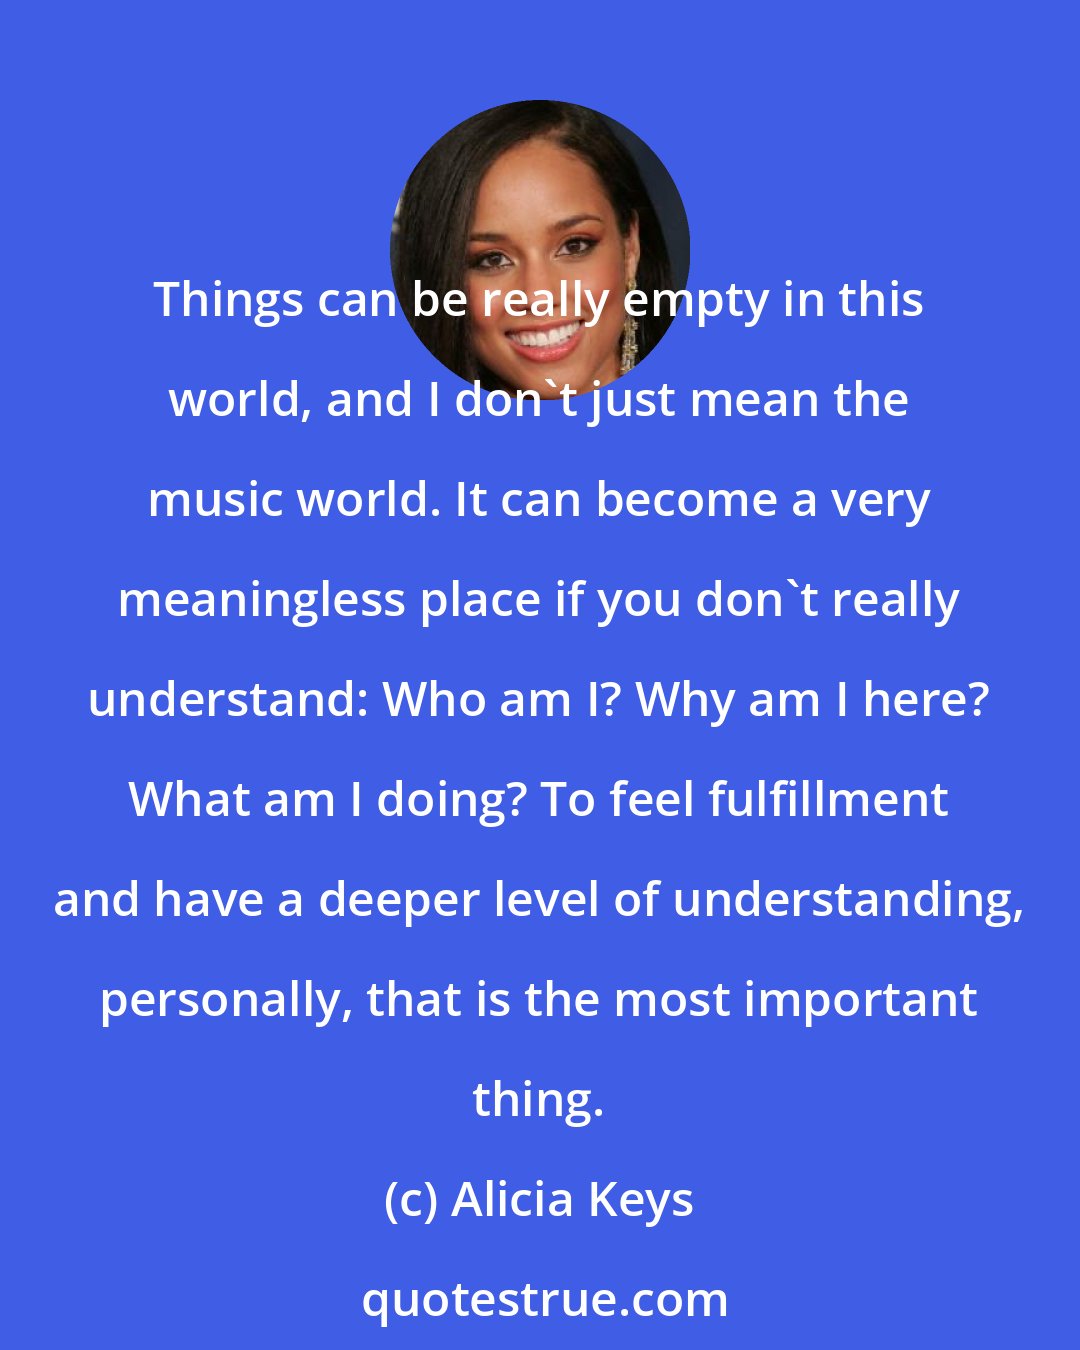 Alicia Keys: Things can be really empty in this world, and I don't just mean the music world. It can become a very meaningless place if you don't really understand: Who am I? Why am I here? What am I doing? To feel fulfillment and have a deeper level of understanding, personally, that is the most important thing.